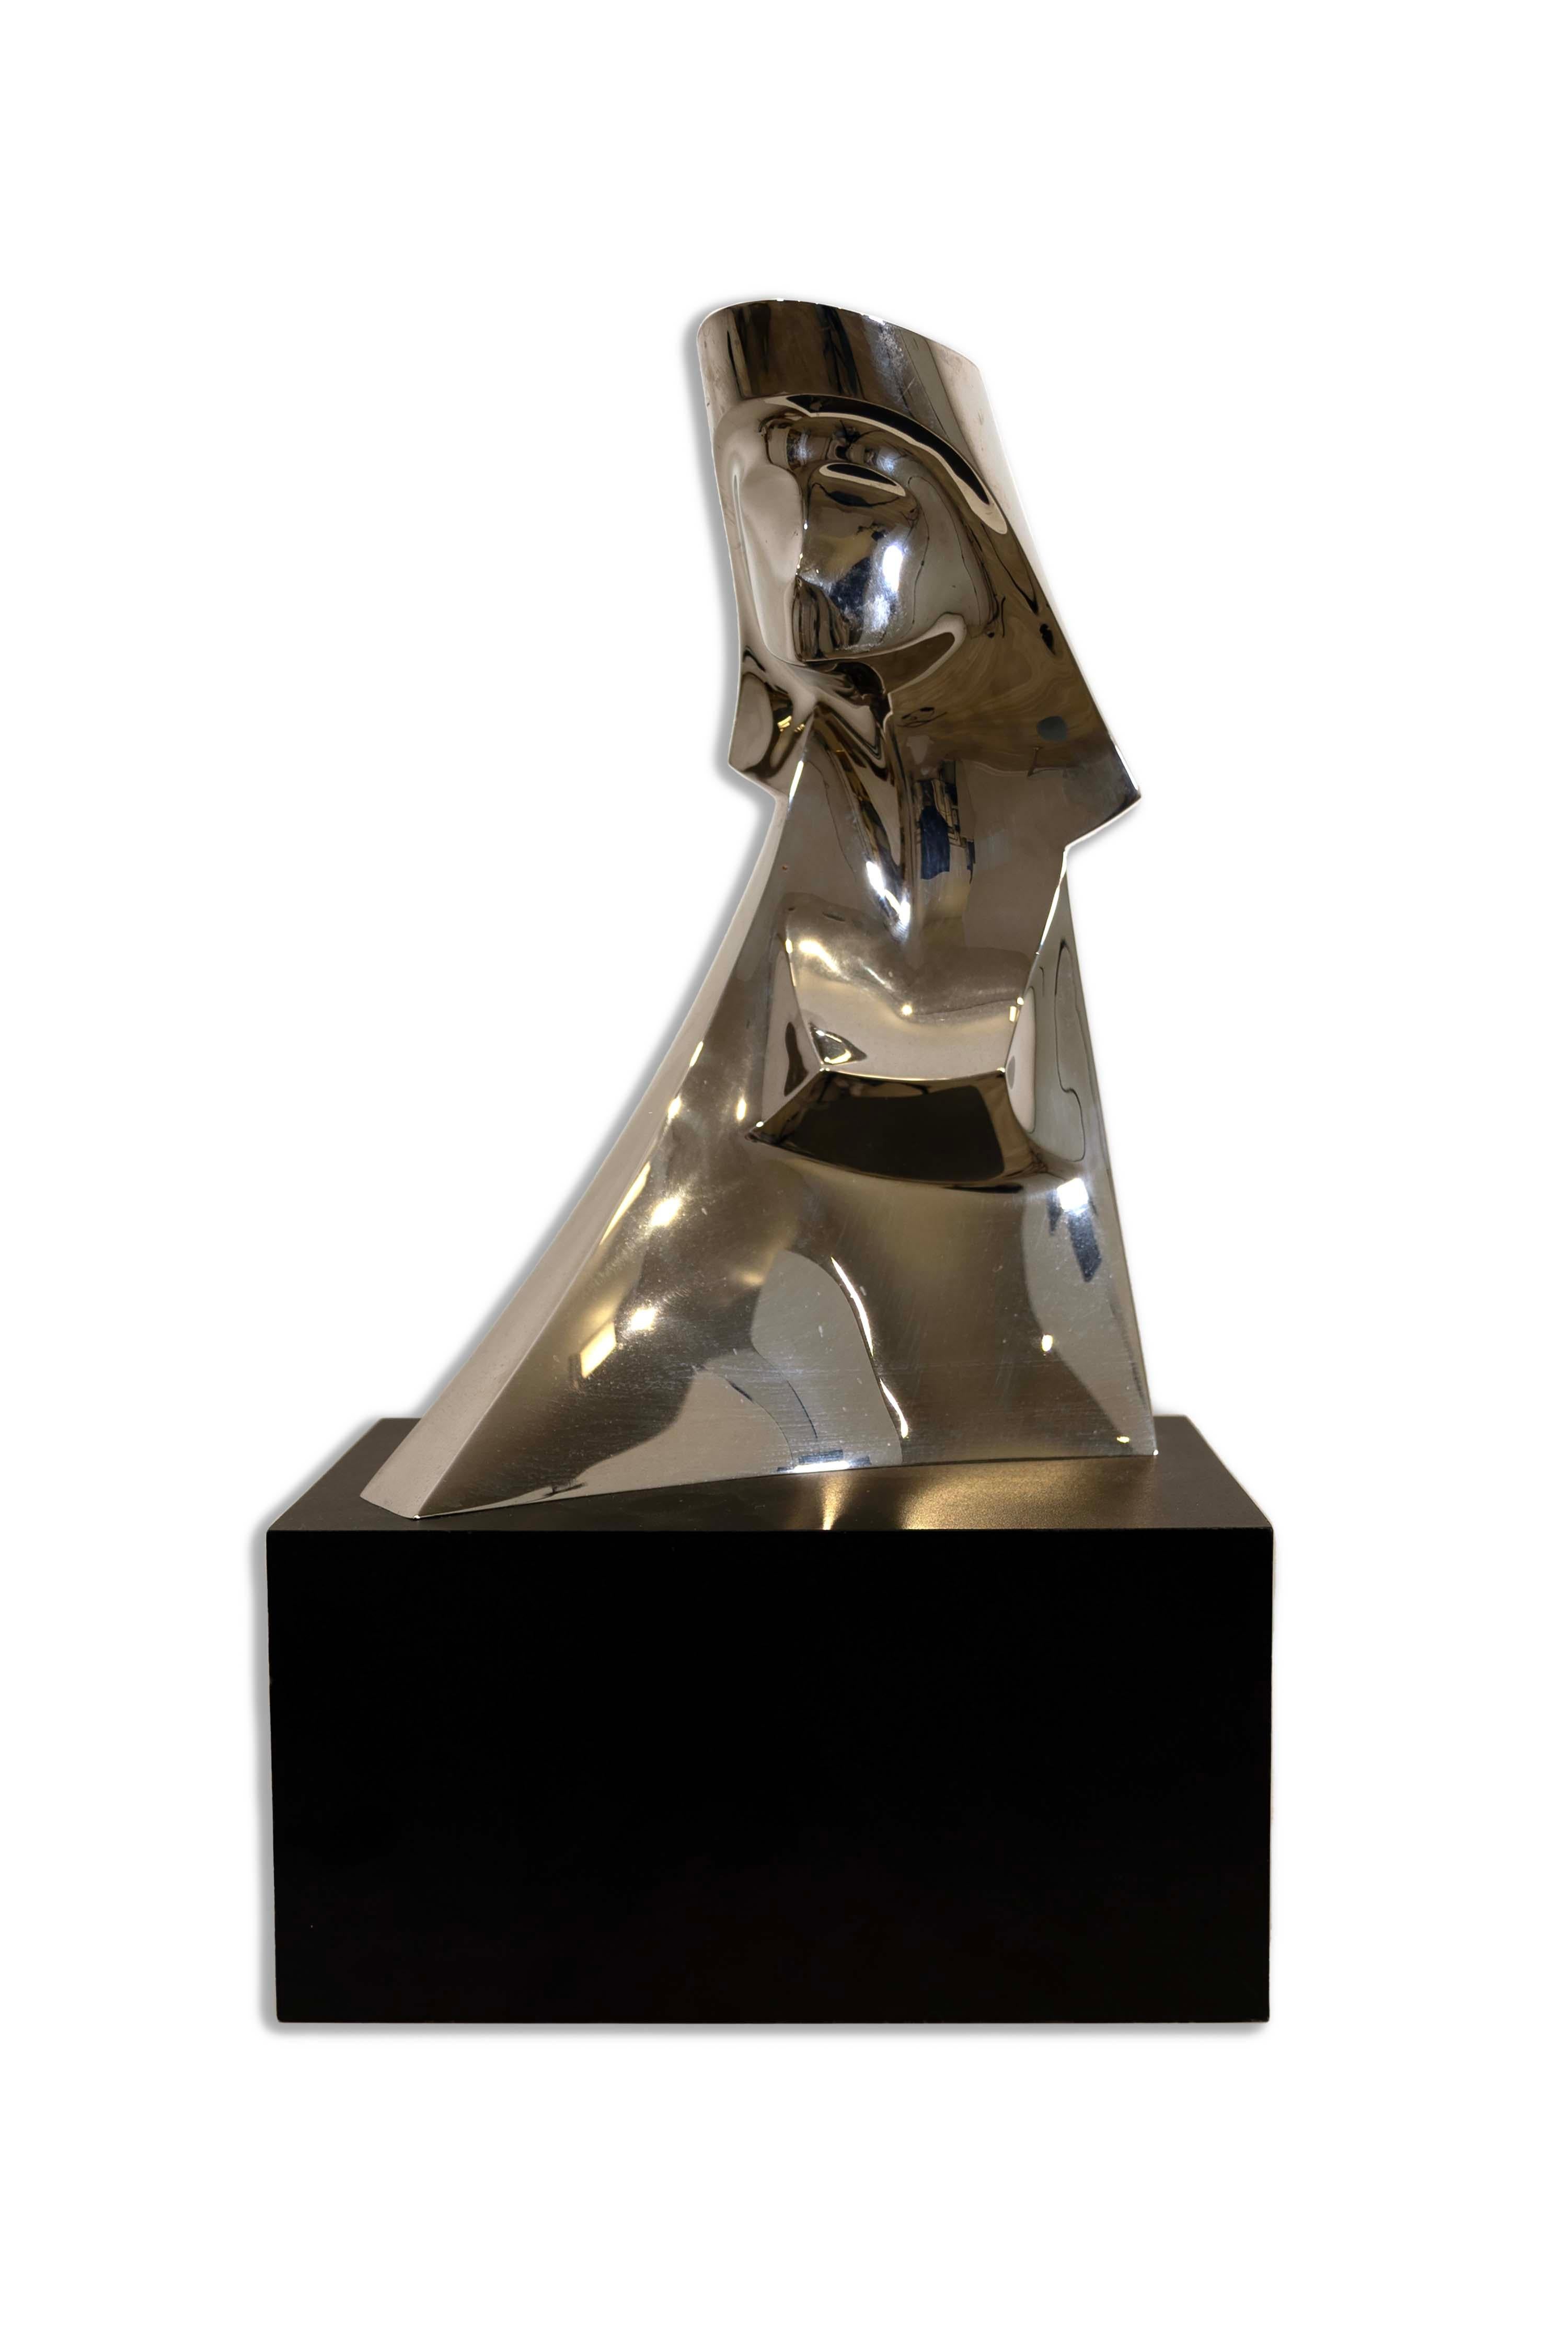 Discover the allure of modern minimalism with the Aluminum Sphinx sculpture by Gary Slater. This piece,  boasts a sleek, reflective surface that plays with light and shadow, creating a mesmerizing visual dance. Perfect for collectors of contemporary